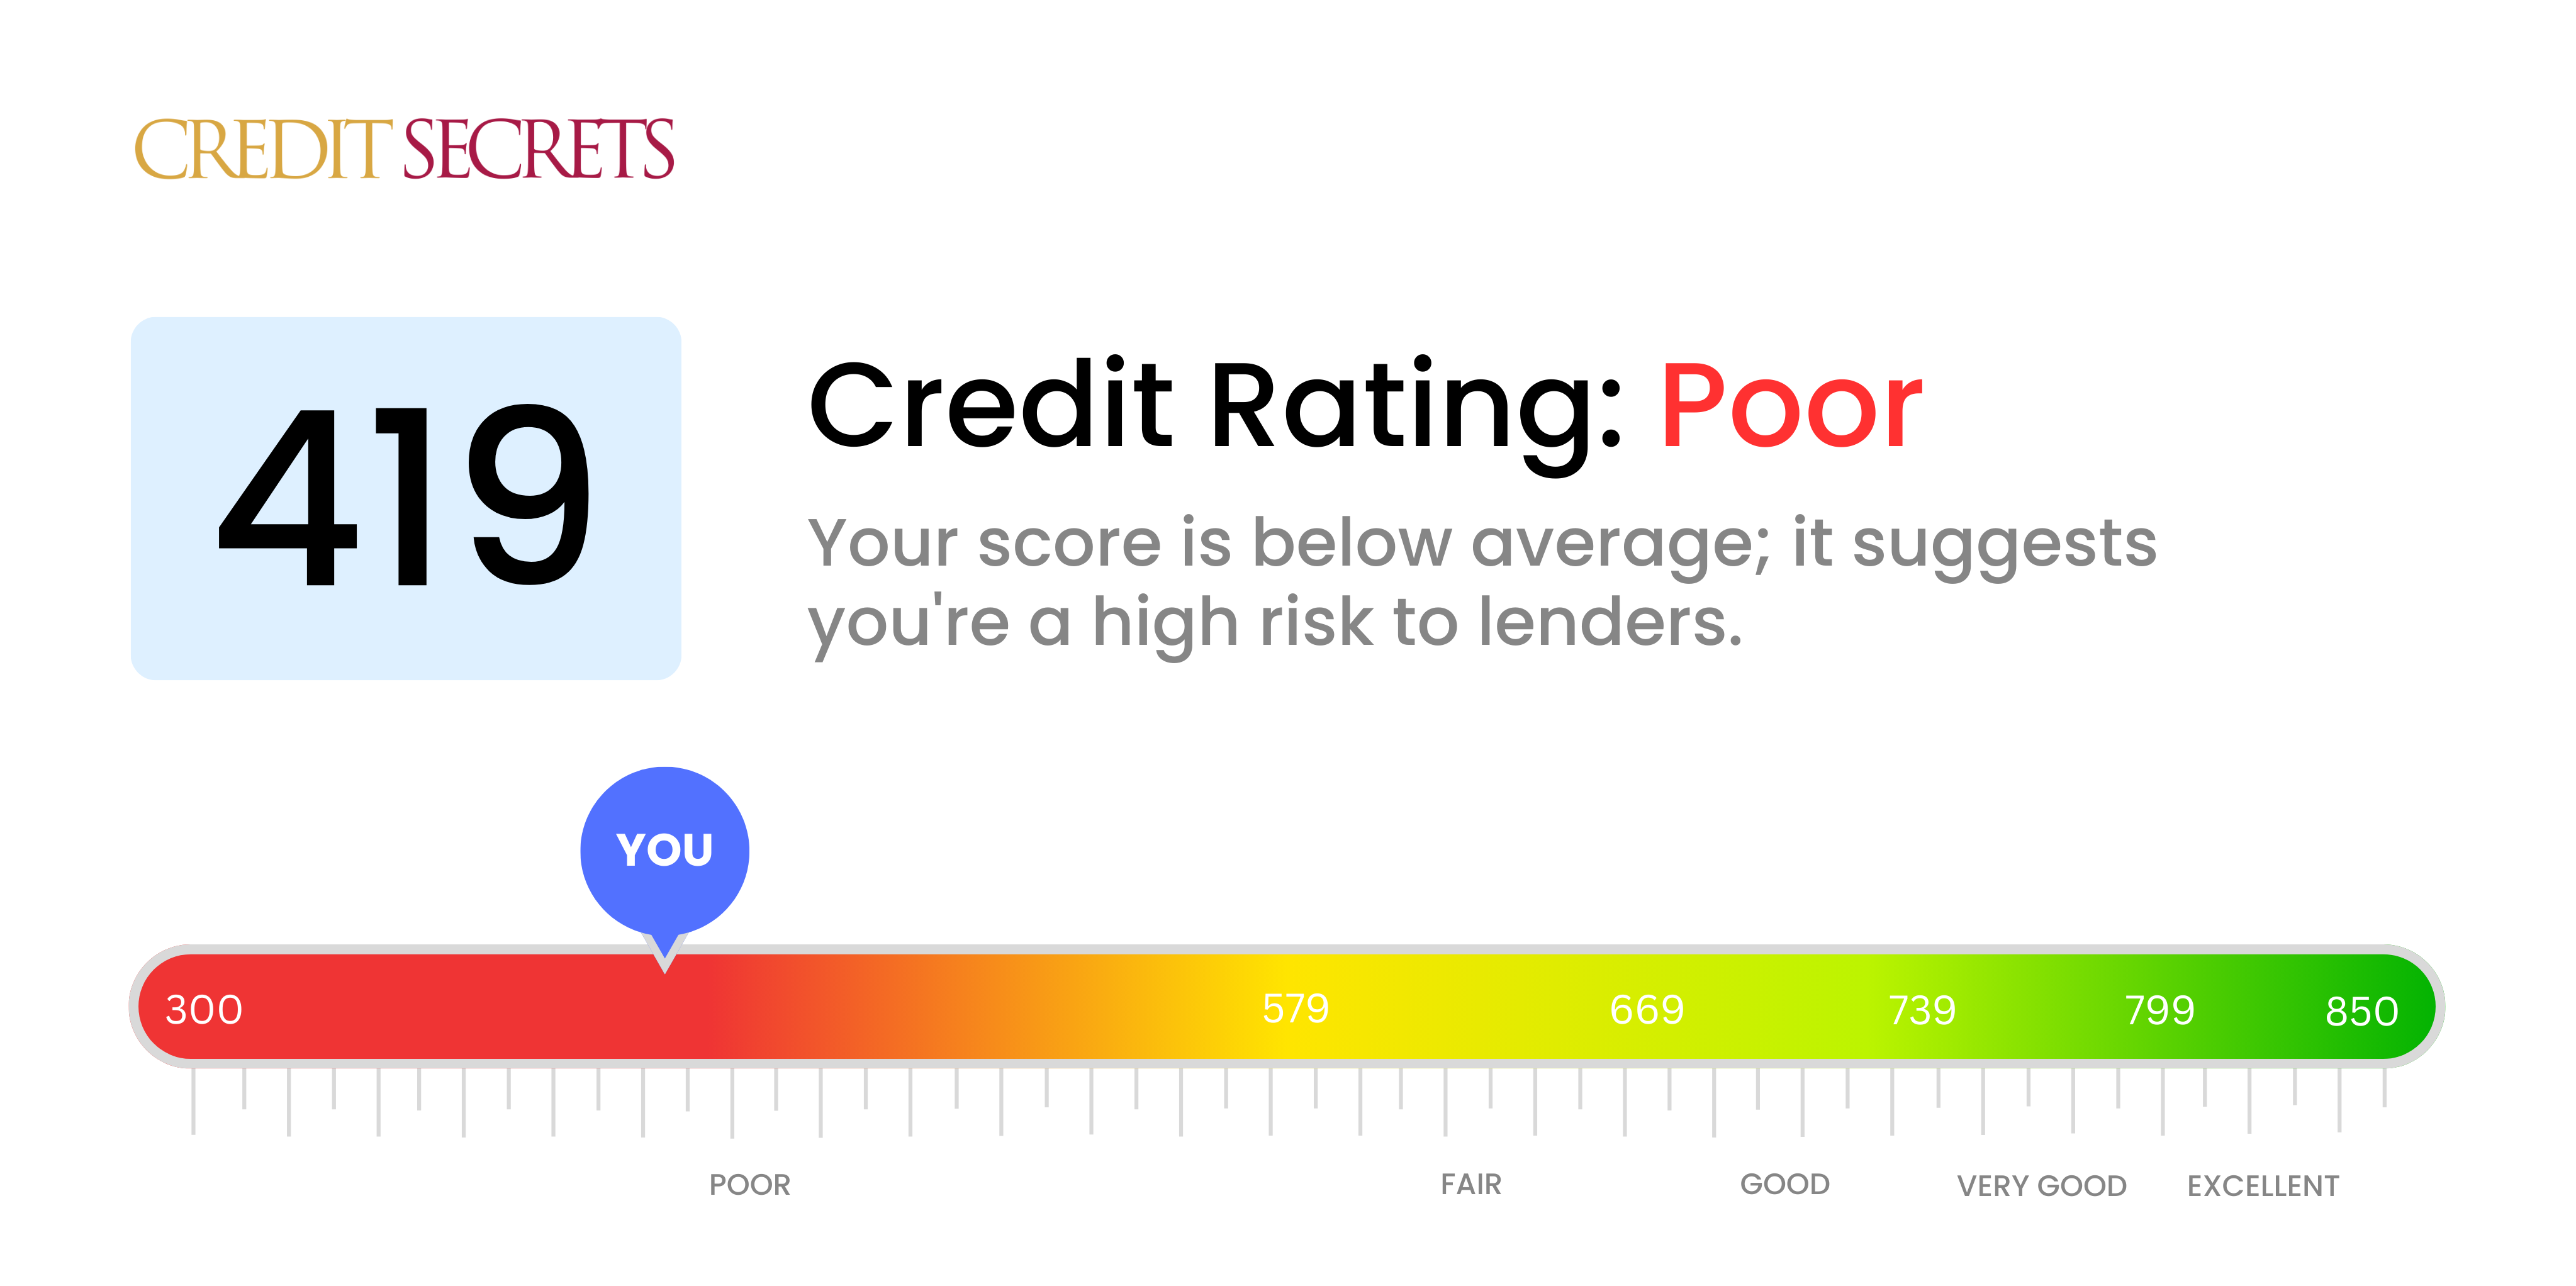 Is 419 a good credit score?